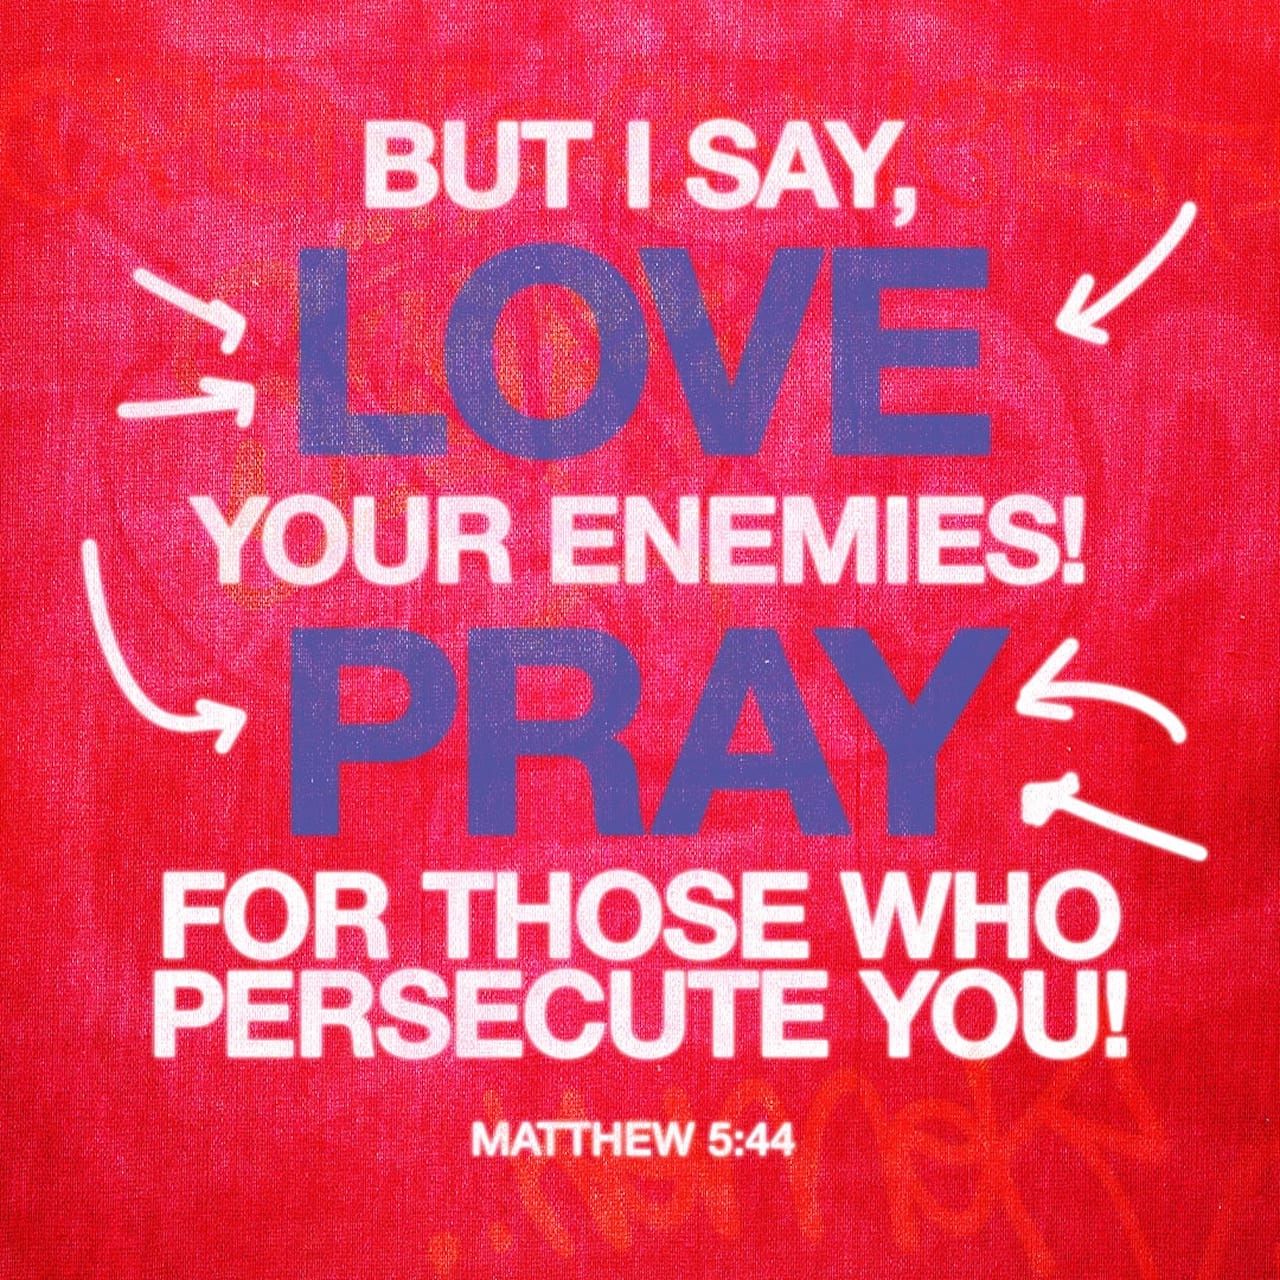 Matthew 5:38-48 “You have heard that it was said, 'Eye for eye, and tooth for tooth.' But I tell you, do not resist an evil person. If anyone slaps you on the